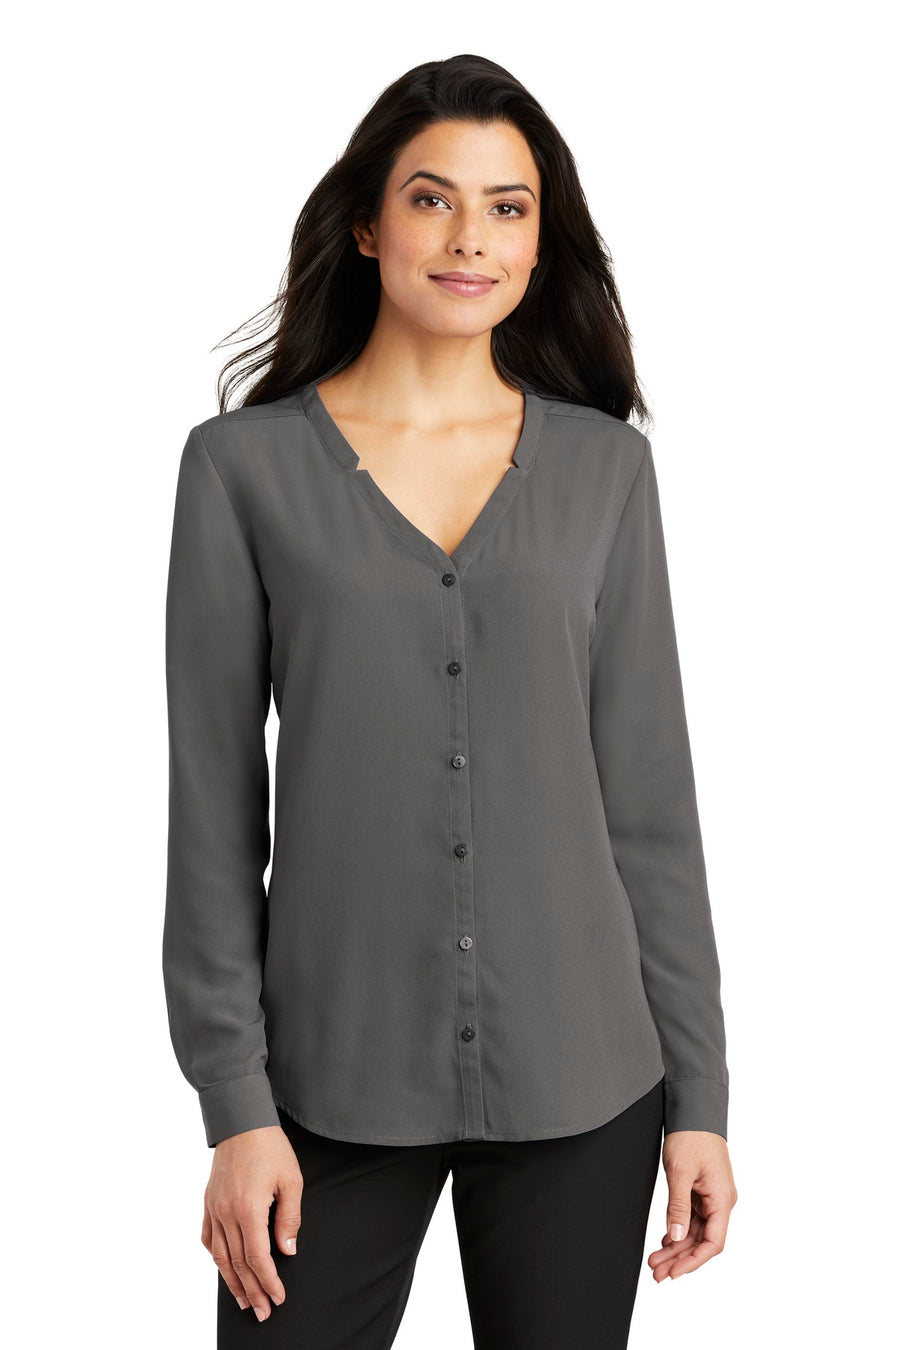 Port Authority Long Sleeve Button-Front Blouse.